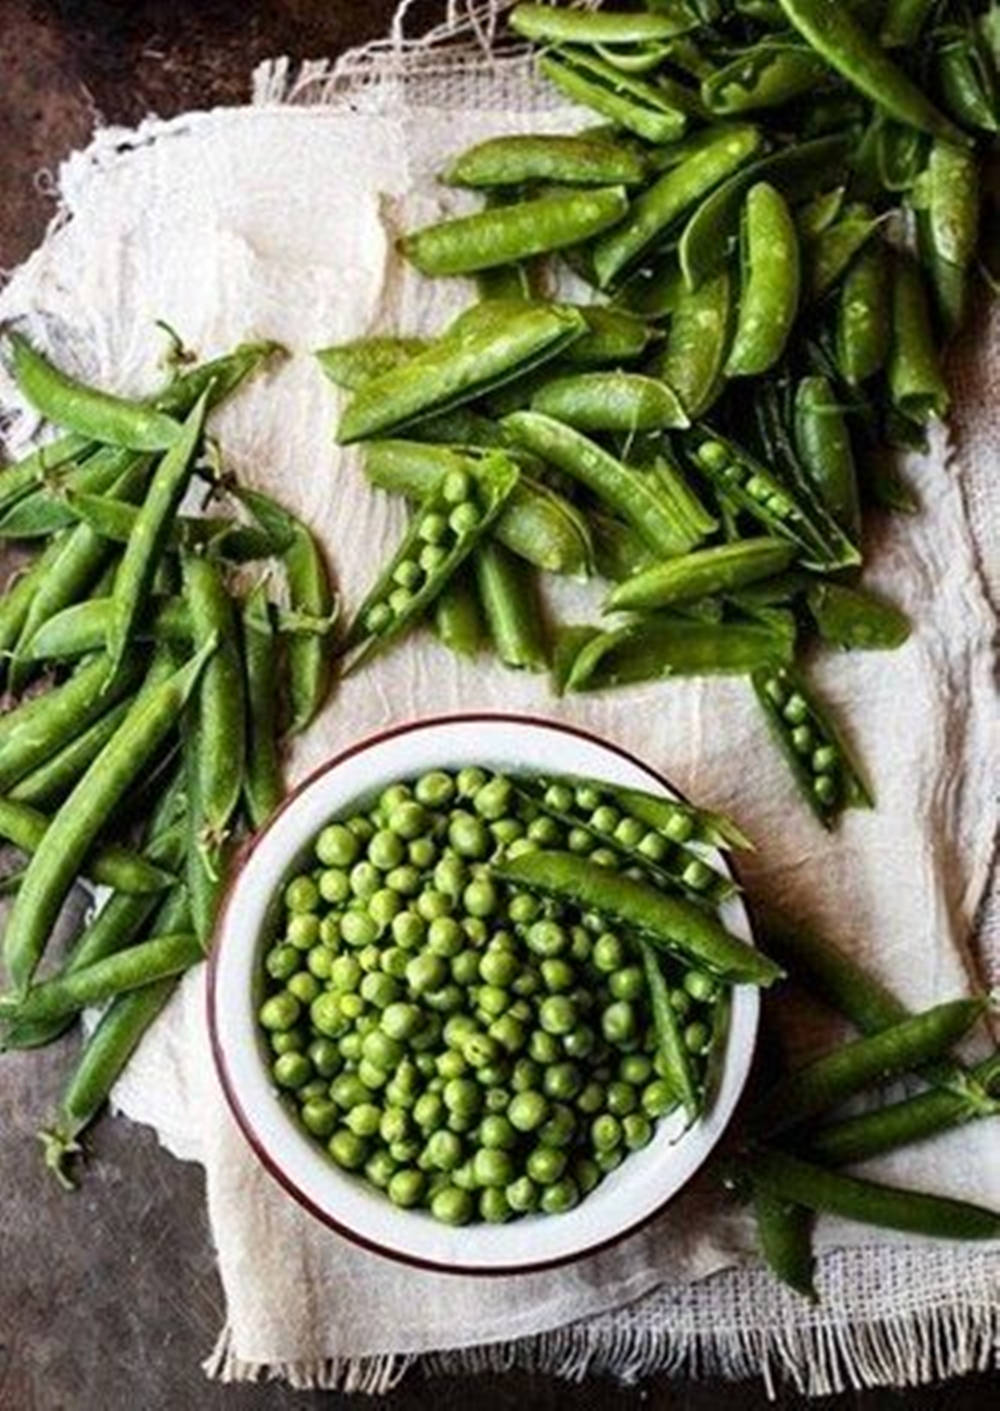 Shelled And Boiled Edamame Beans Wallpaper